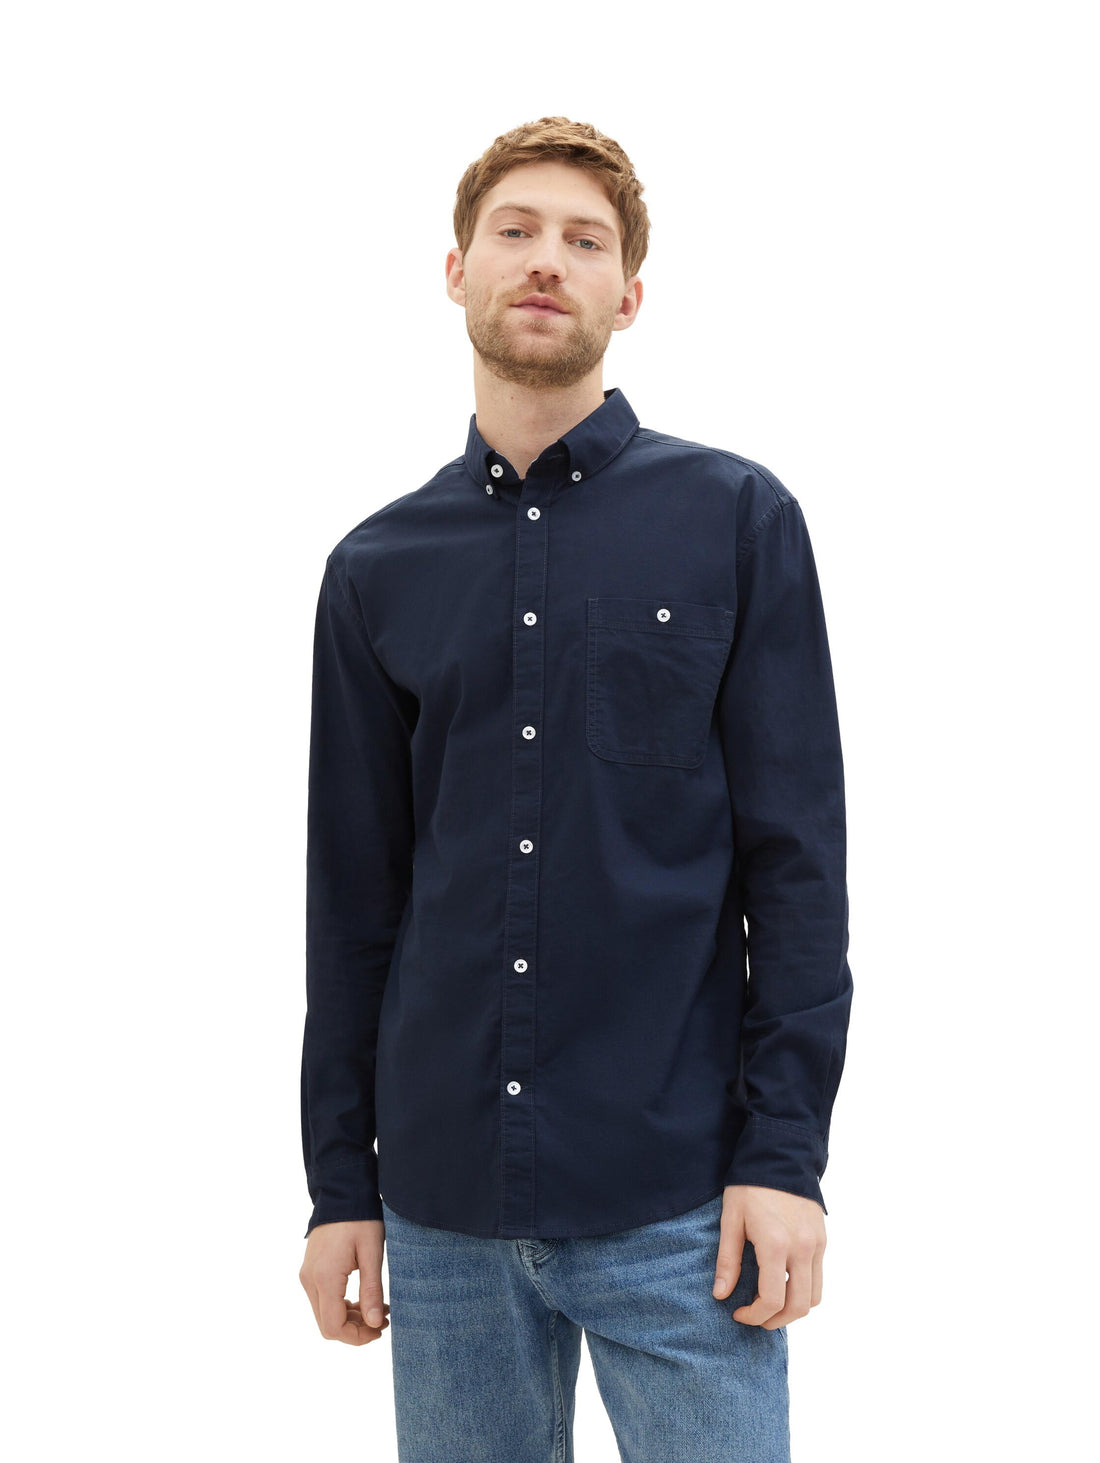 Fitted Stretch Oxford Shirt_1040117_10668_01